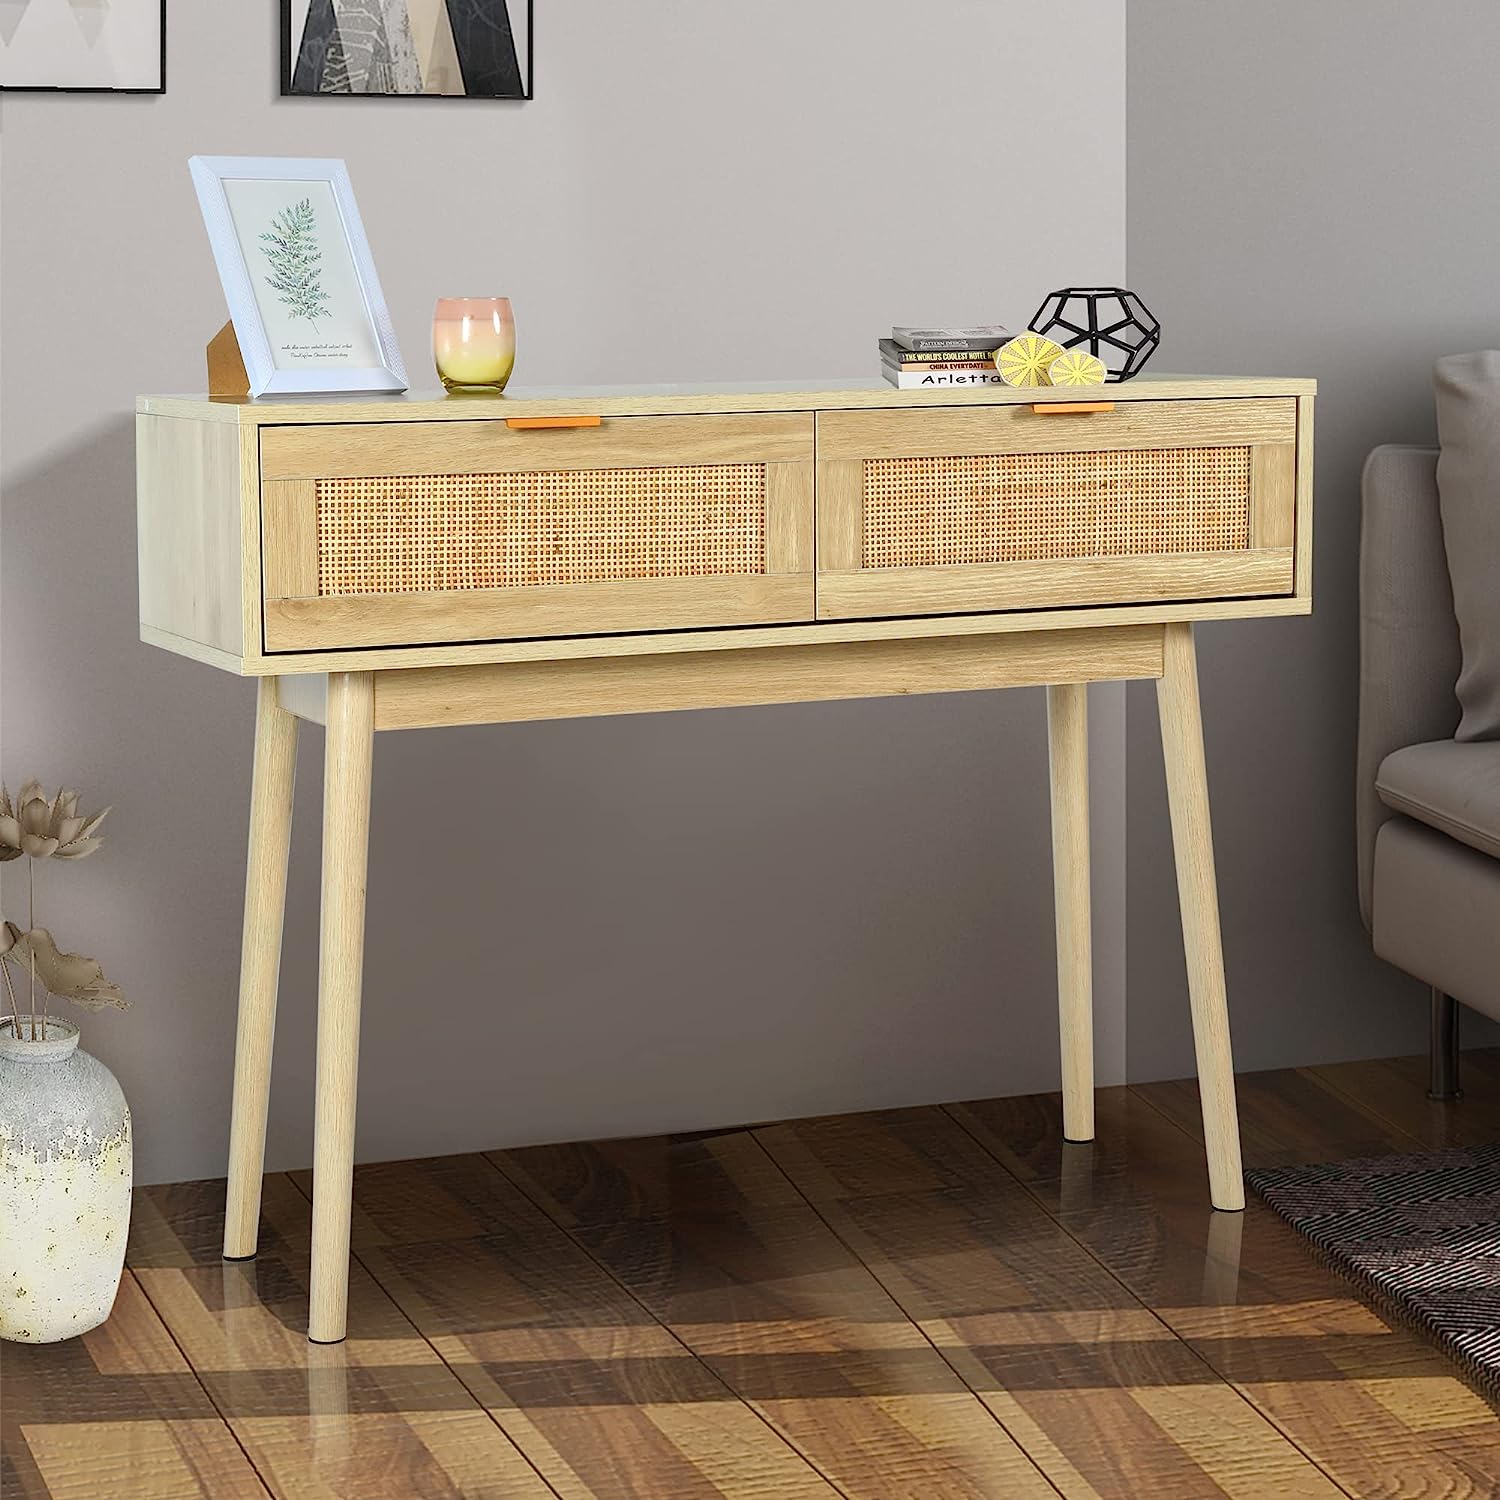 Rattan Console Table with Drawers, Rattan Entryway Table, Accent Sofa Table, Rattan Furniture, Hallway table, Living room table, Modern desk